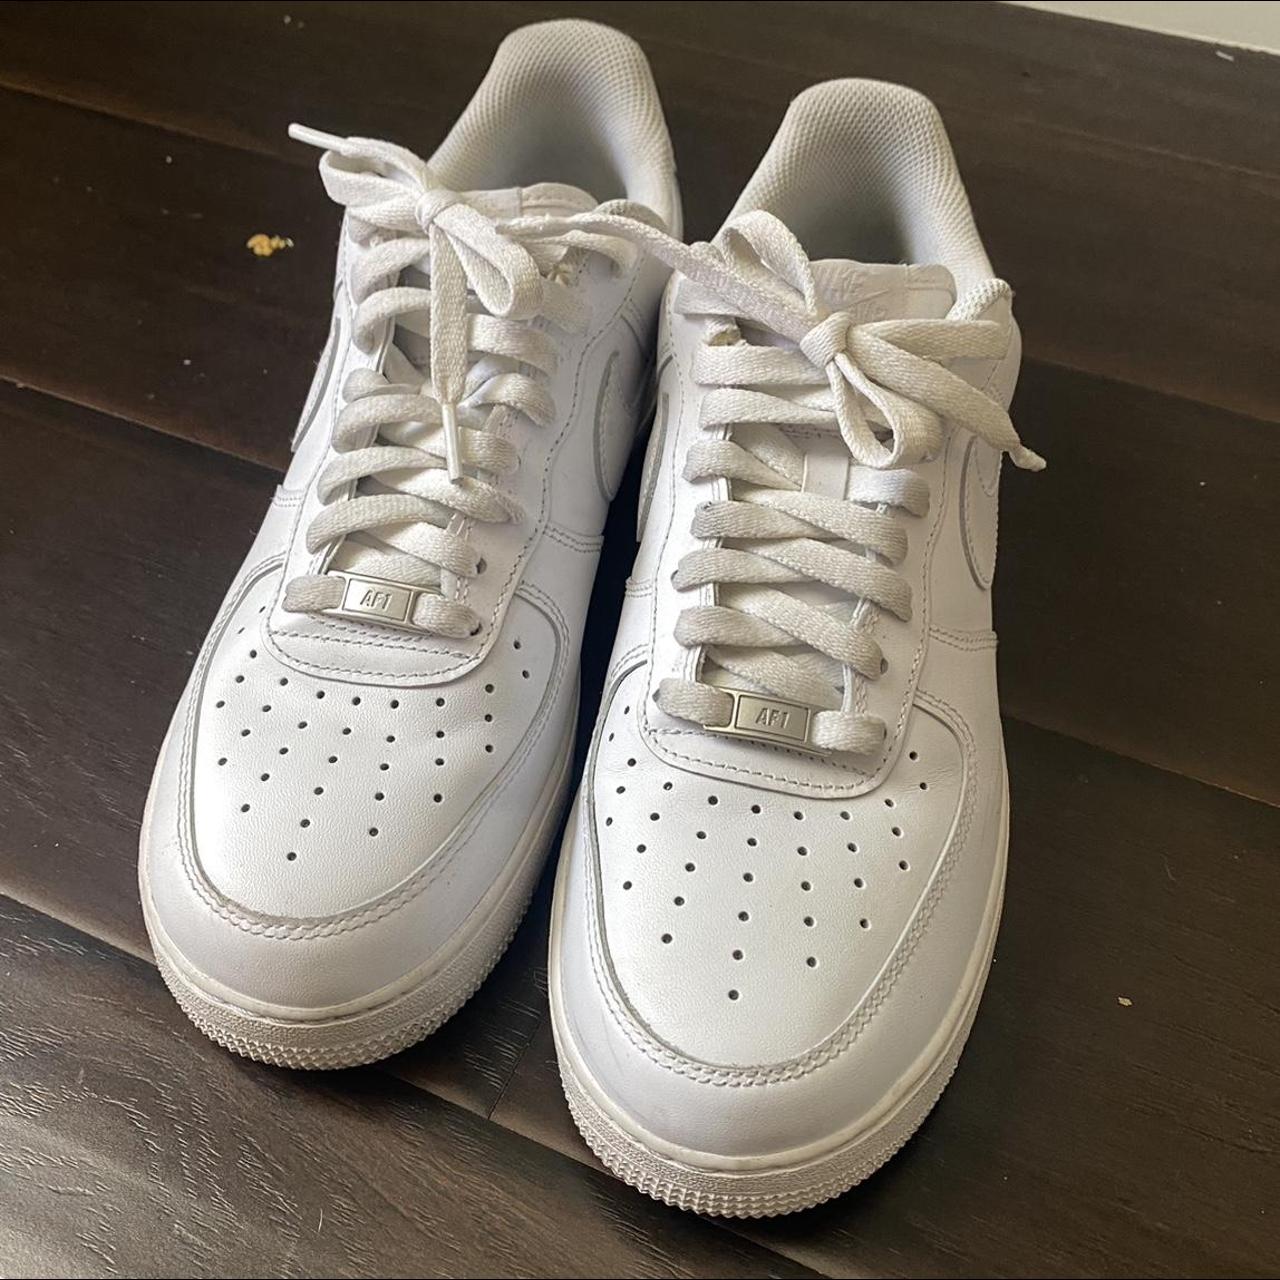 WHITE AIR FORCE 1 MENS SIZE 10 PRICE IS FIRM - Depop